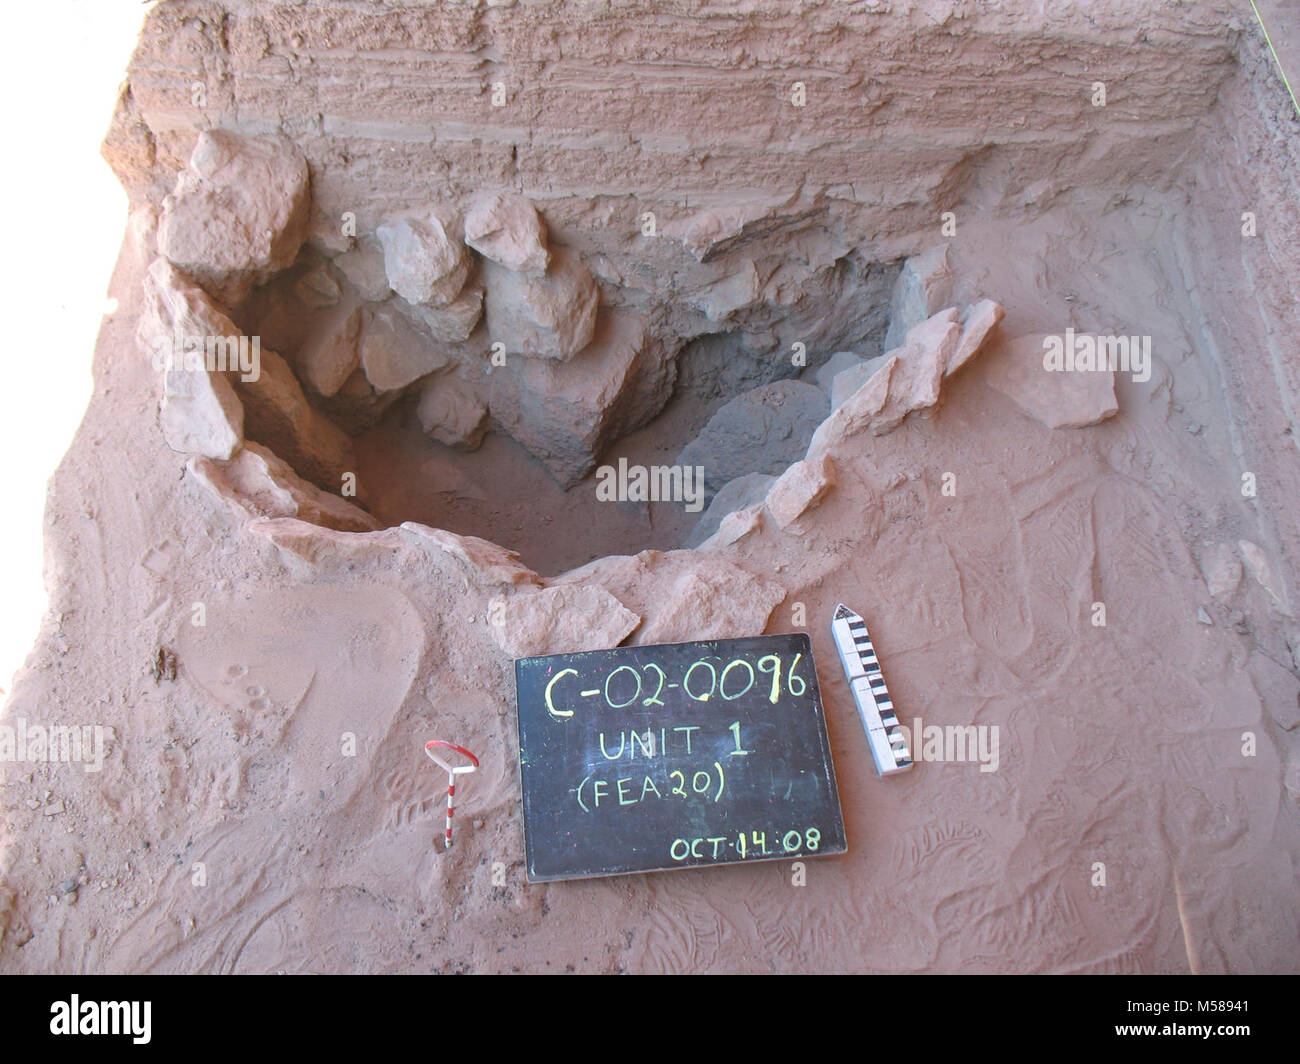 Carbon dating grand canyon